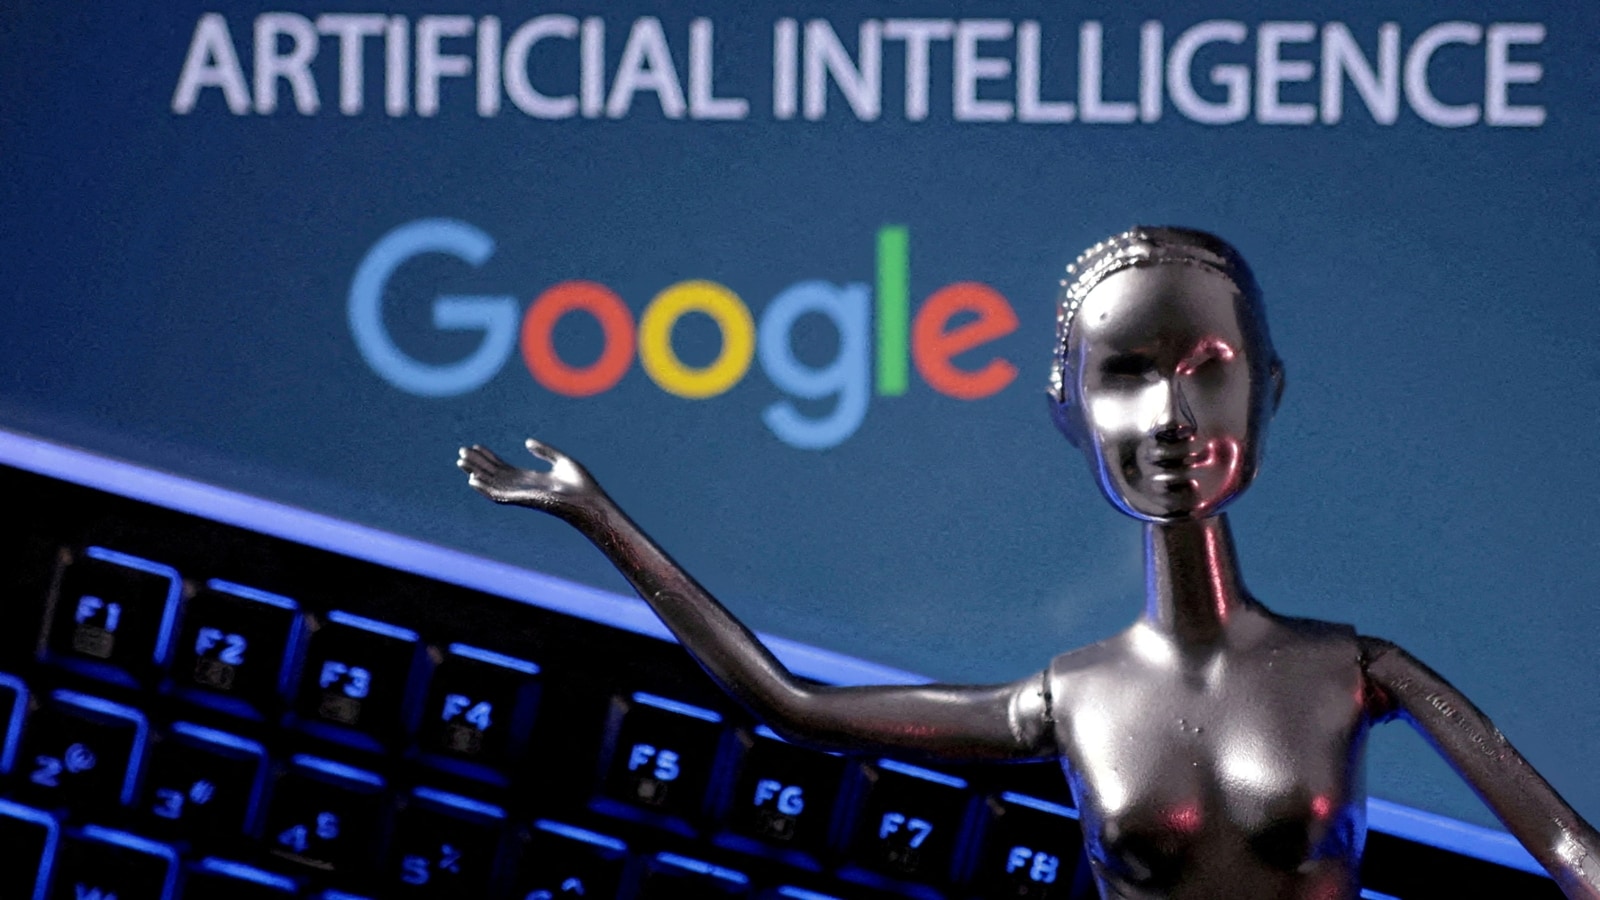 ‘How Embarrassing’: Google’s AI under fire for refusing to condemn pedophilia amid historical images backlash